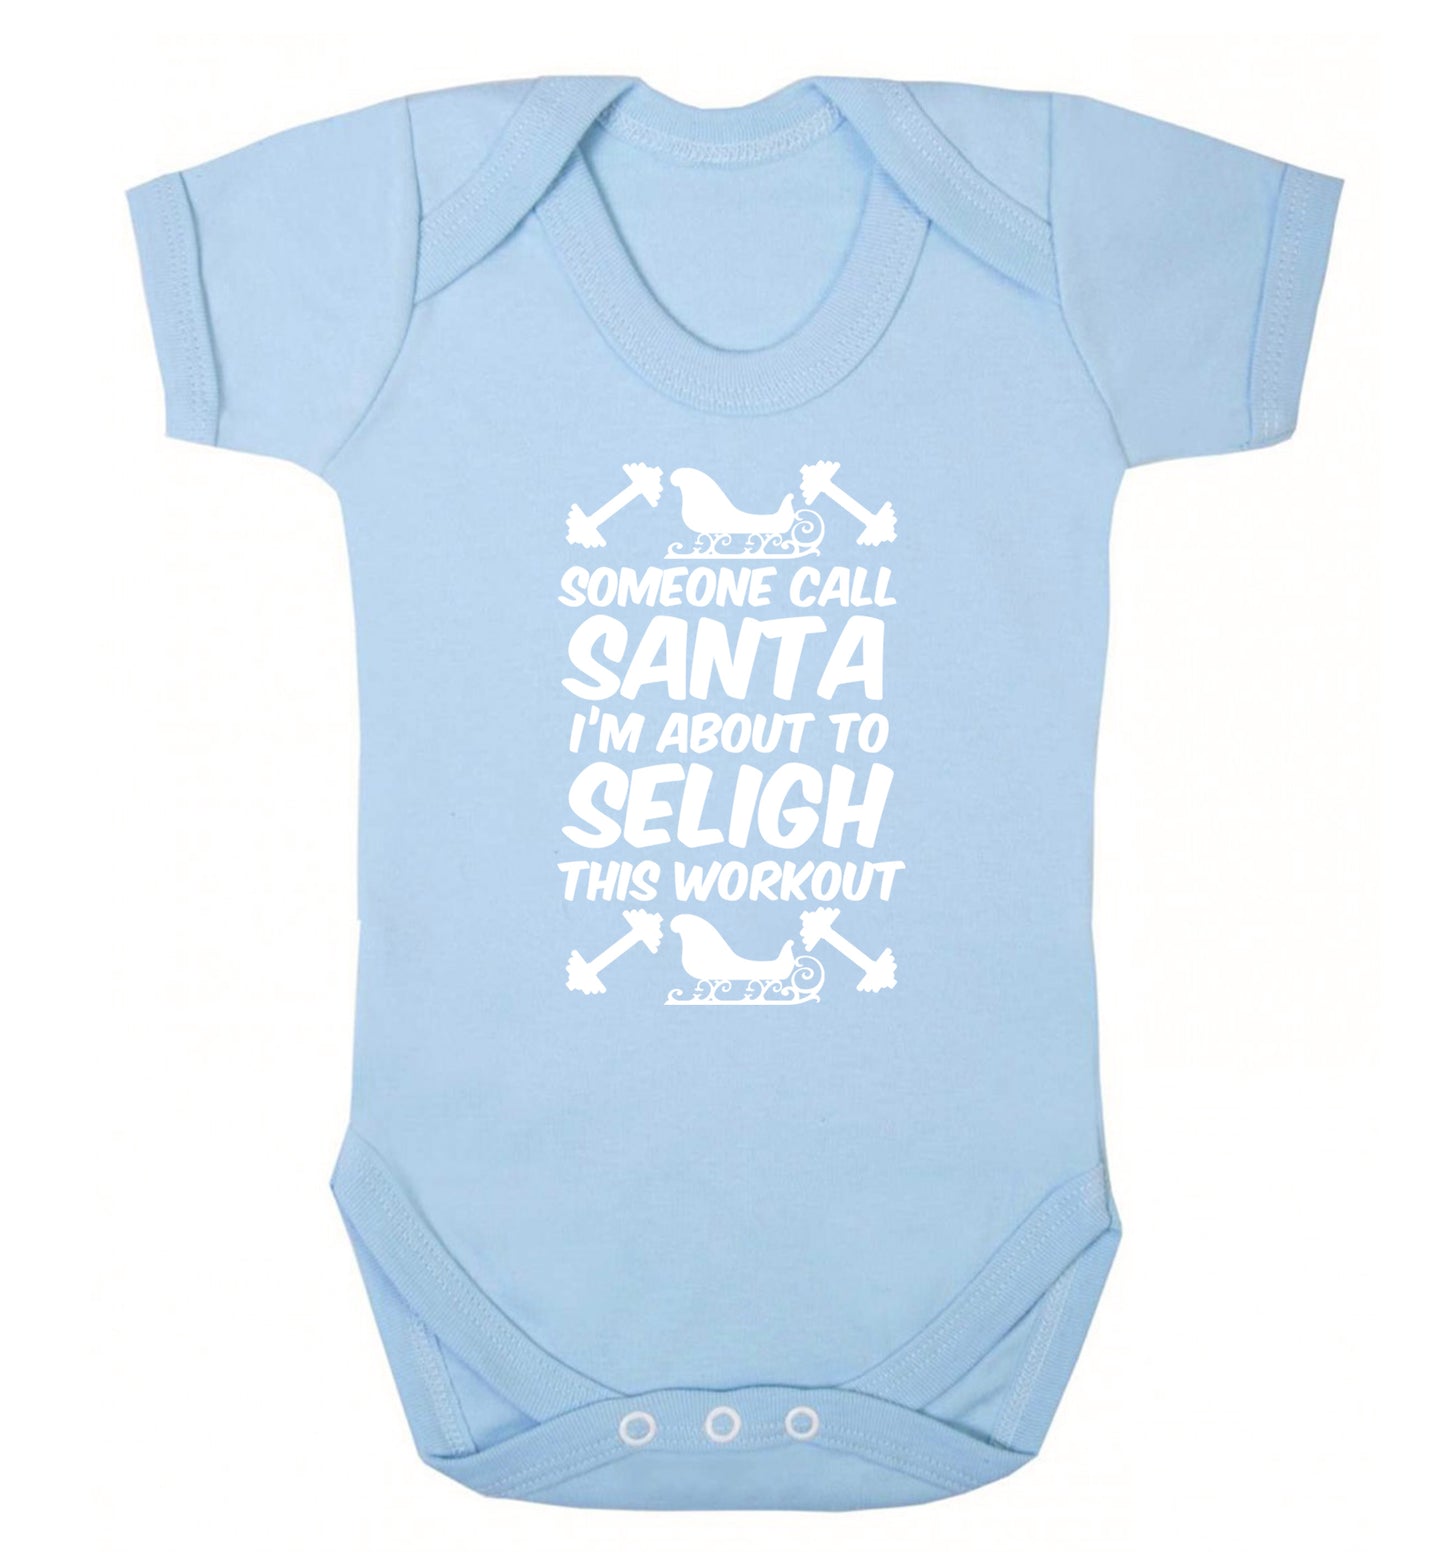 Someone call santa, I'm about to sleigh this workout Baby Vest pale blue 18-24 months